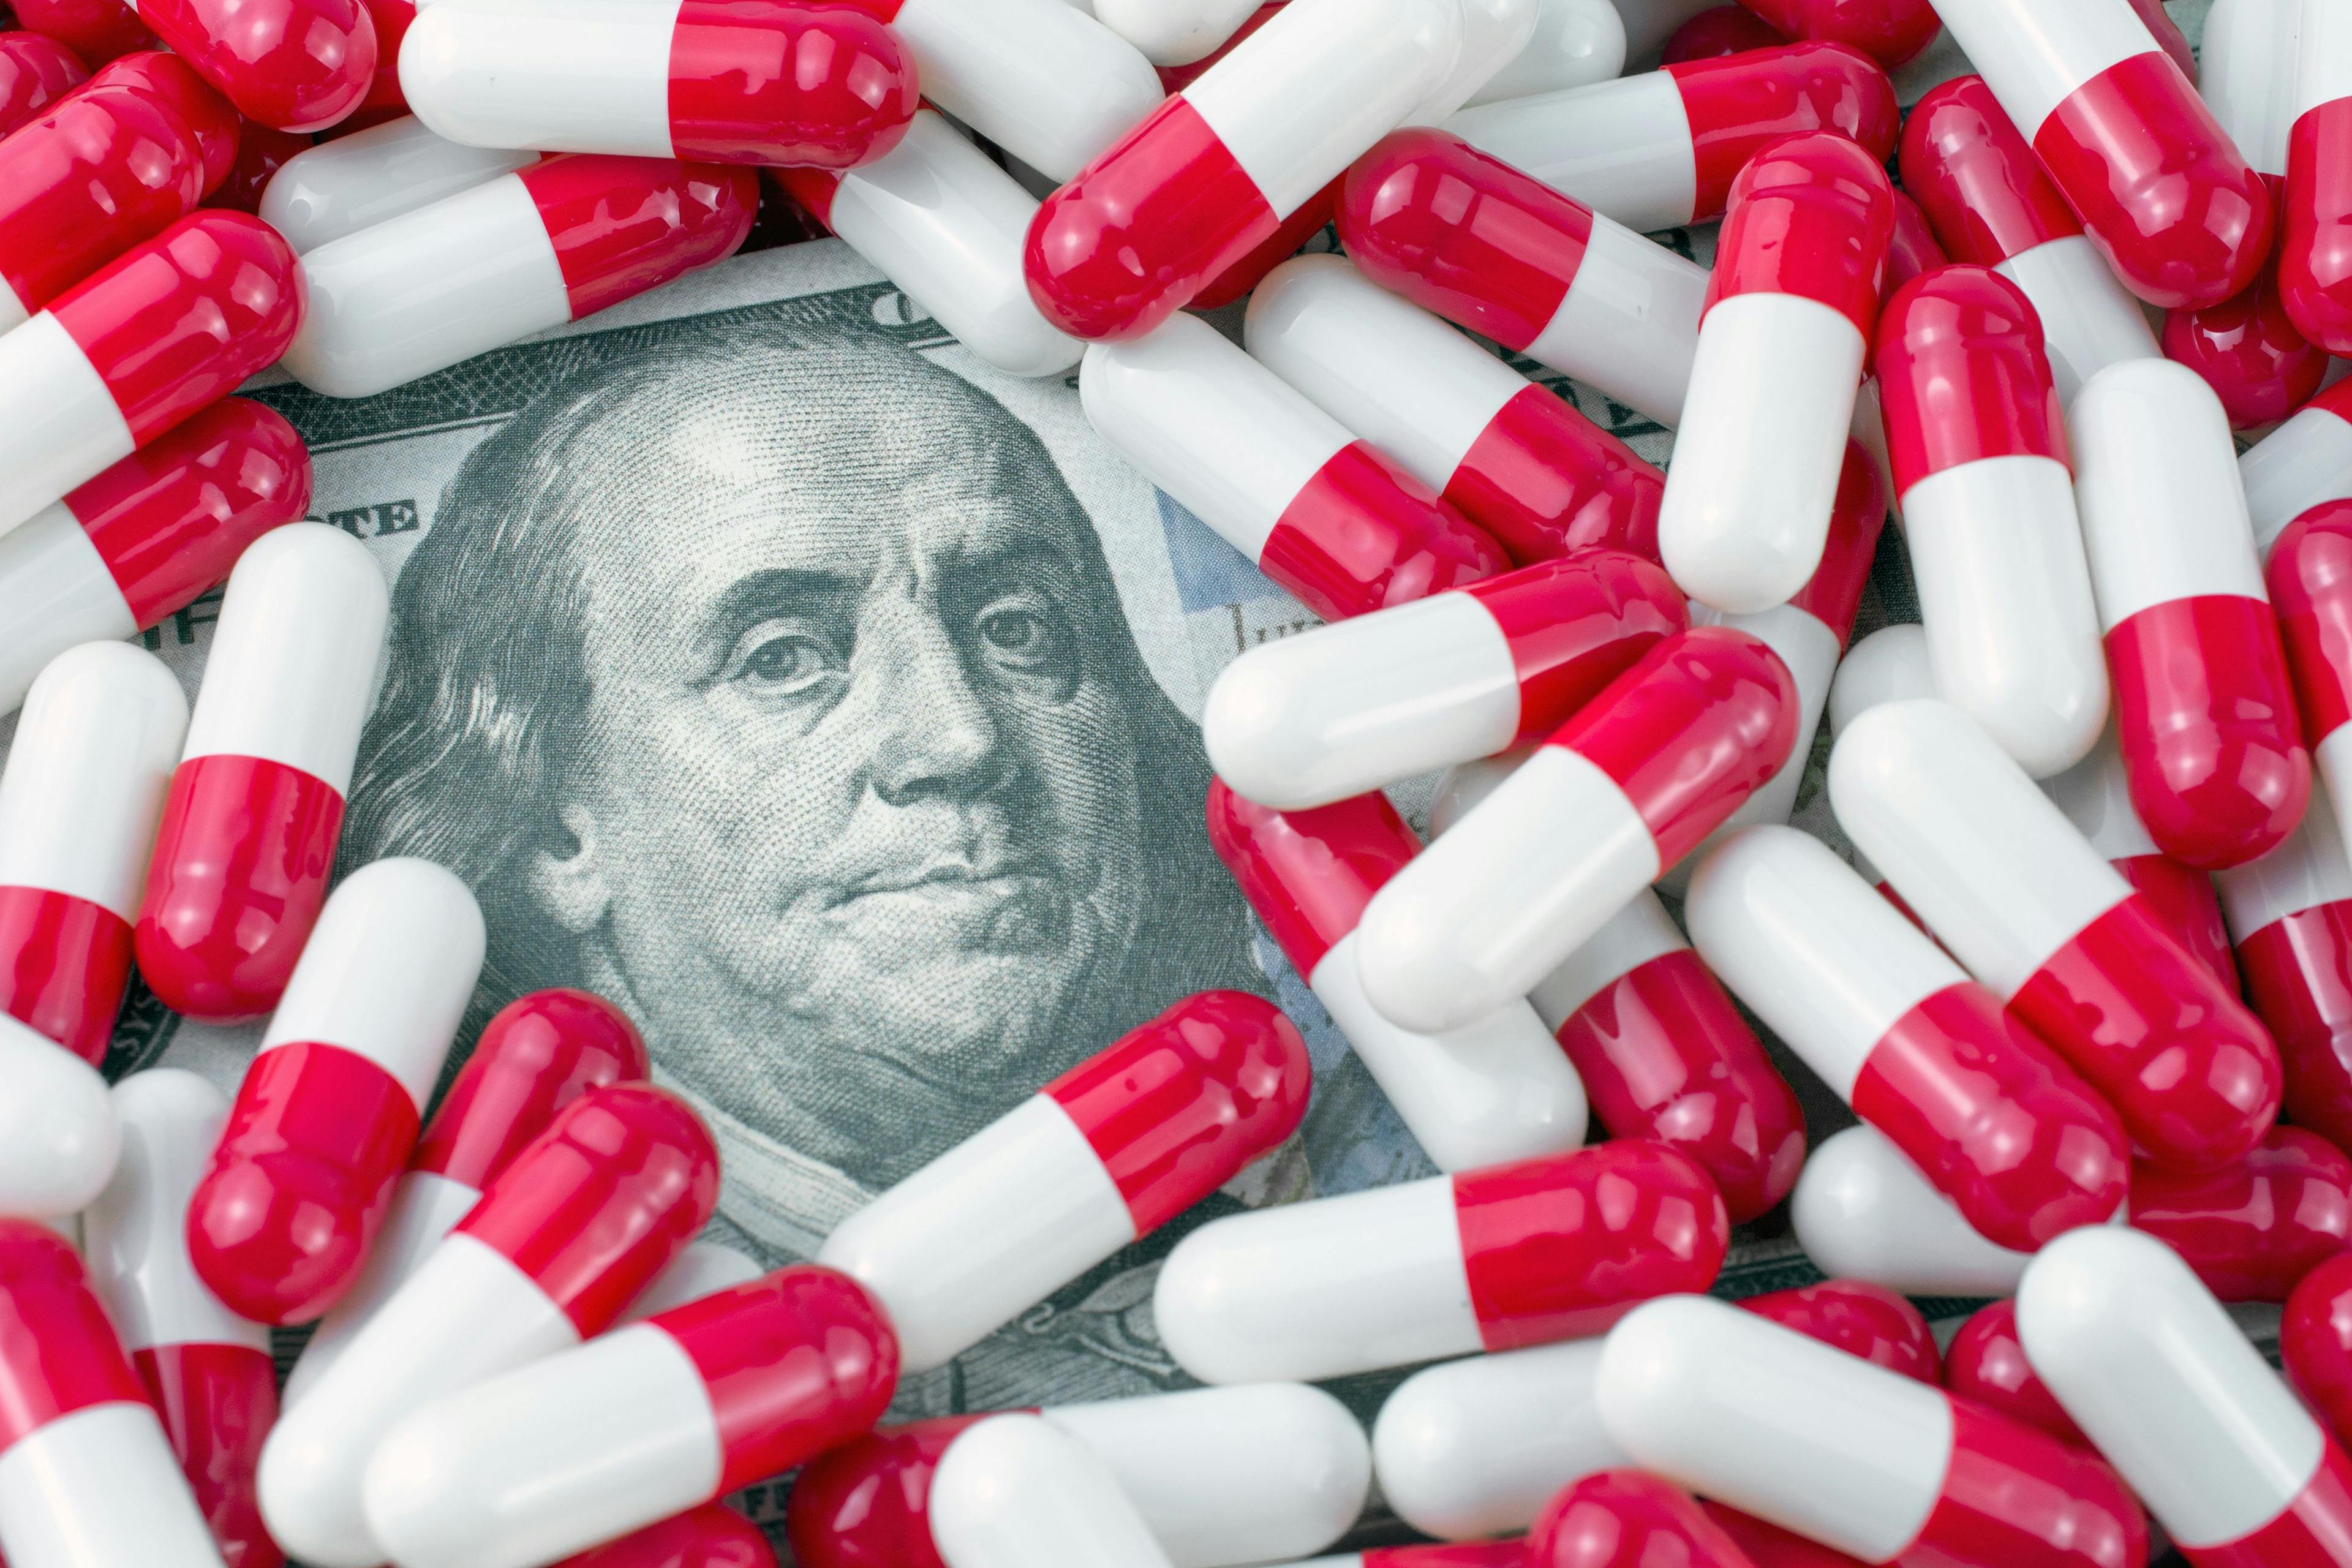 New Year Begins With Hikes in Drug Prices